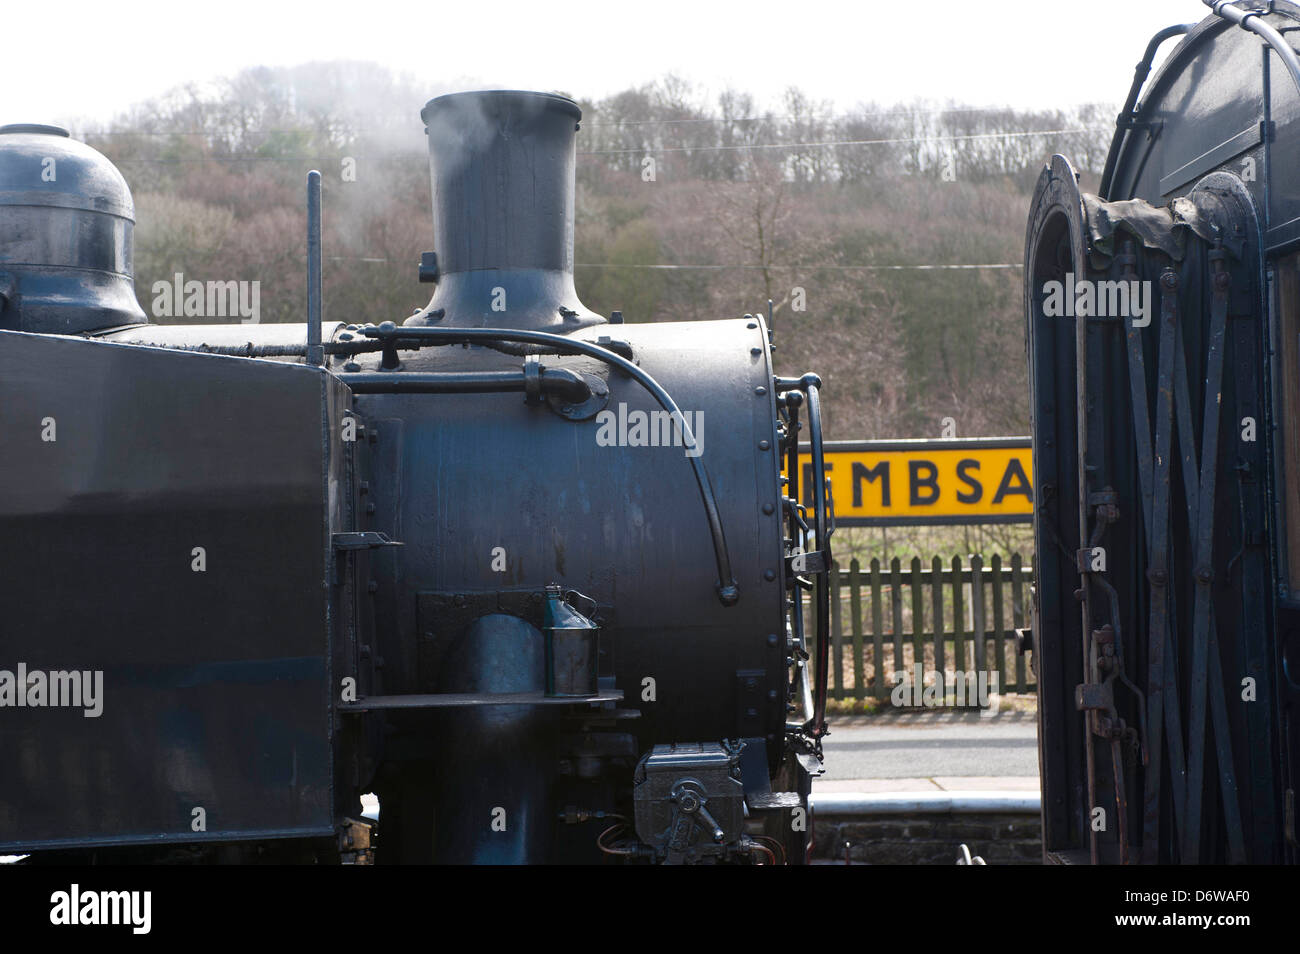 Embsay and Bolton Abbey steam railway Stock Photo